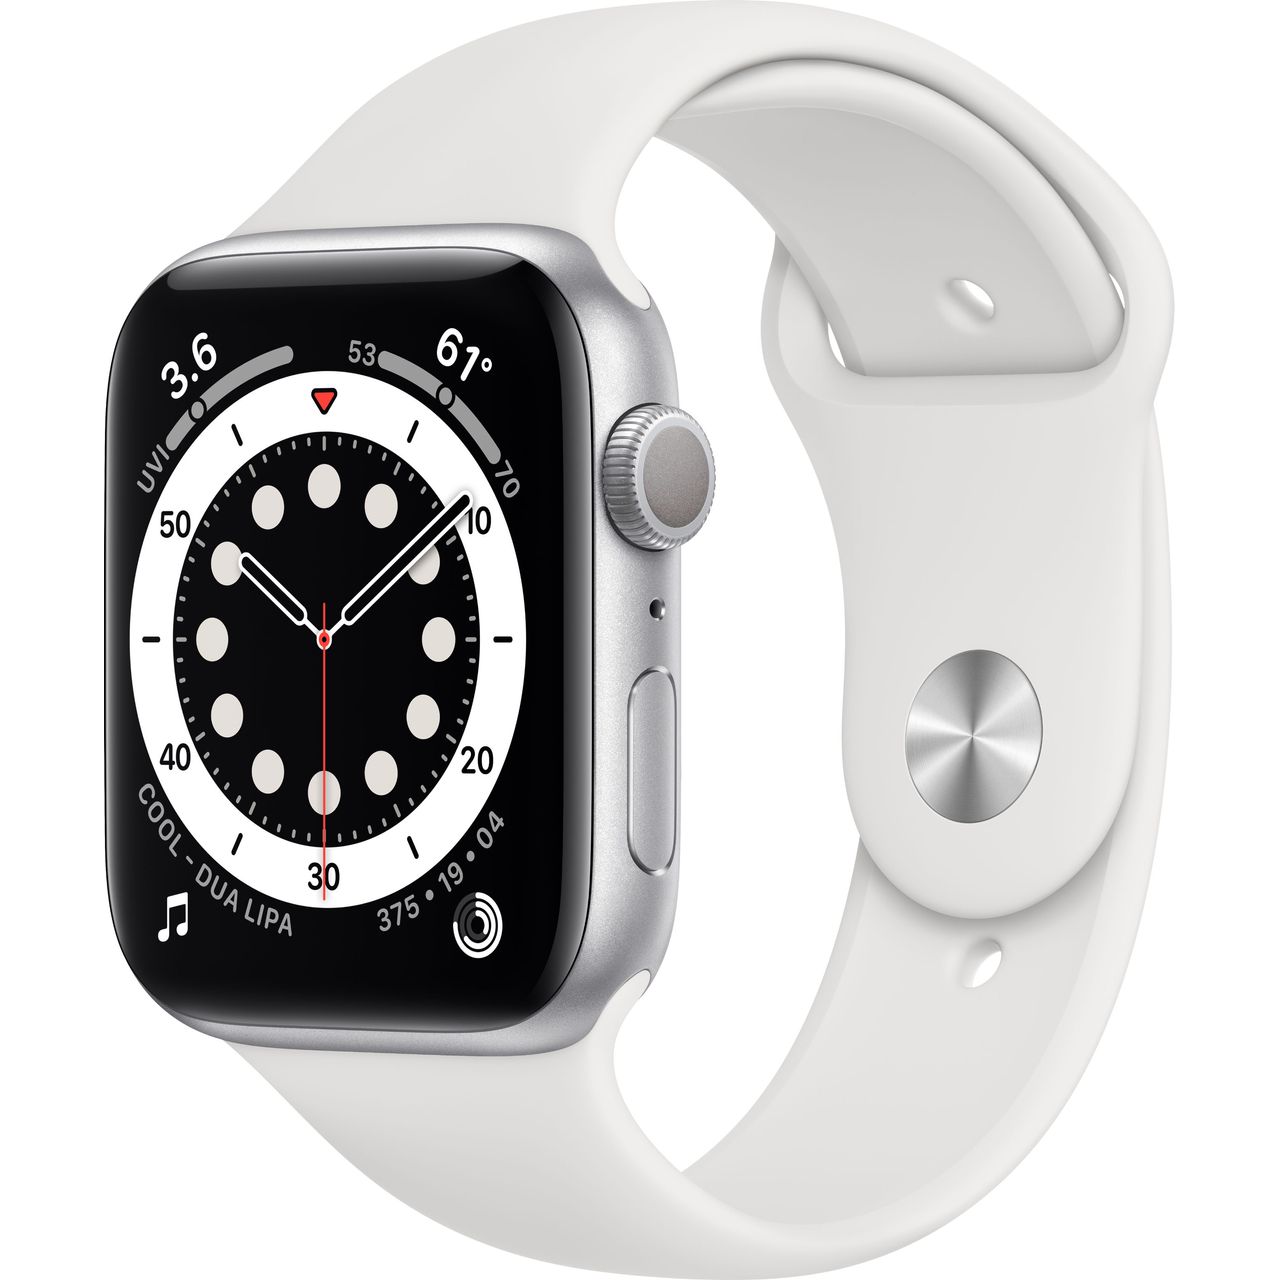 Apple Watch Series 6, 44mm, GPS [2020] Review